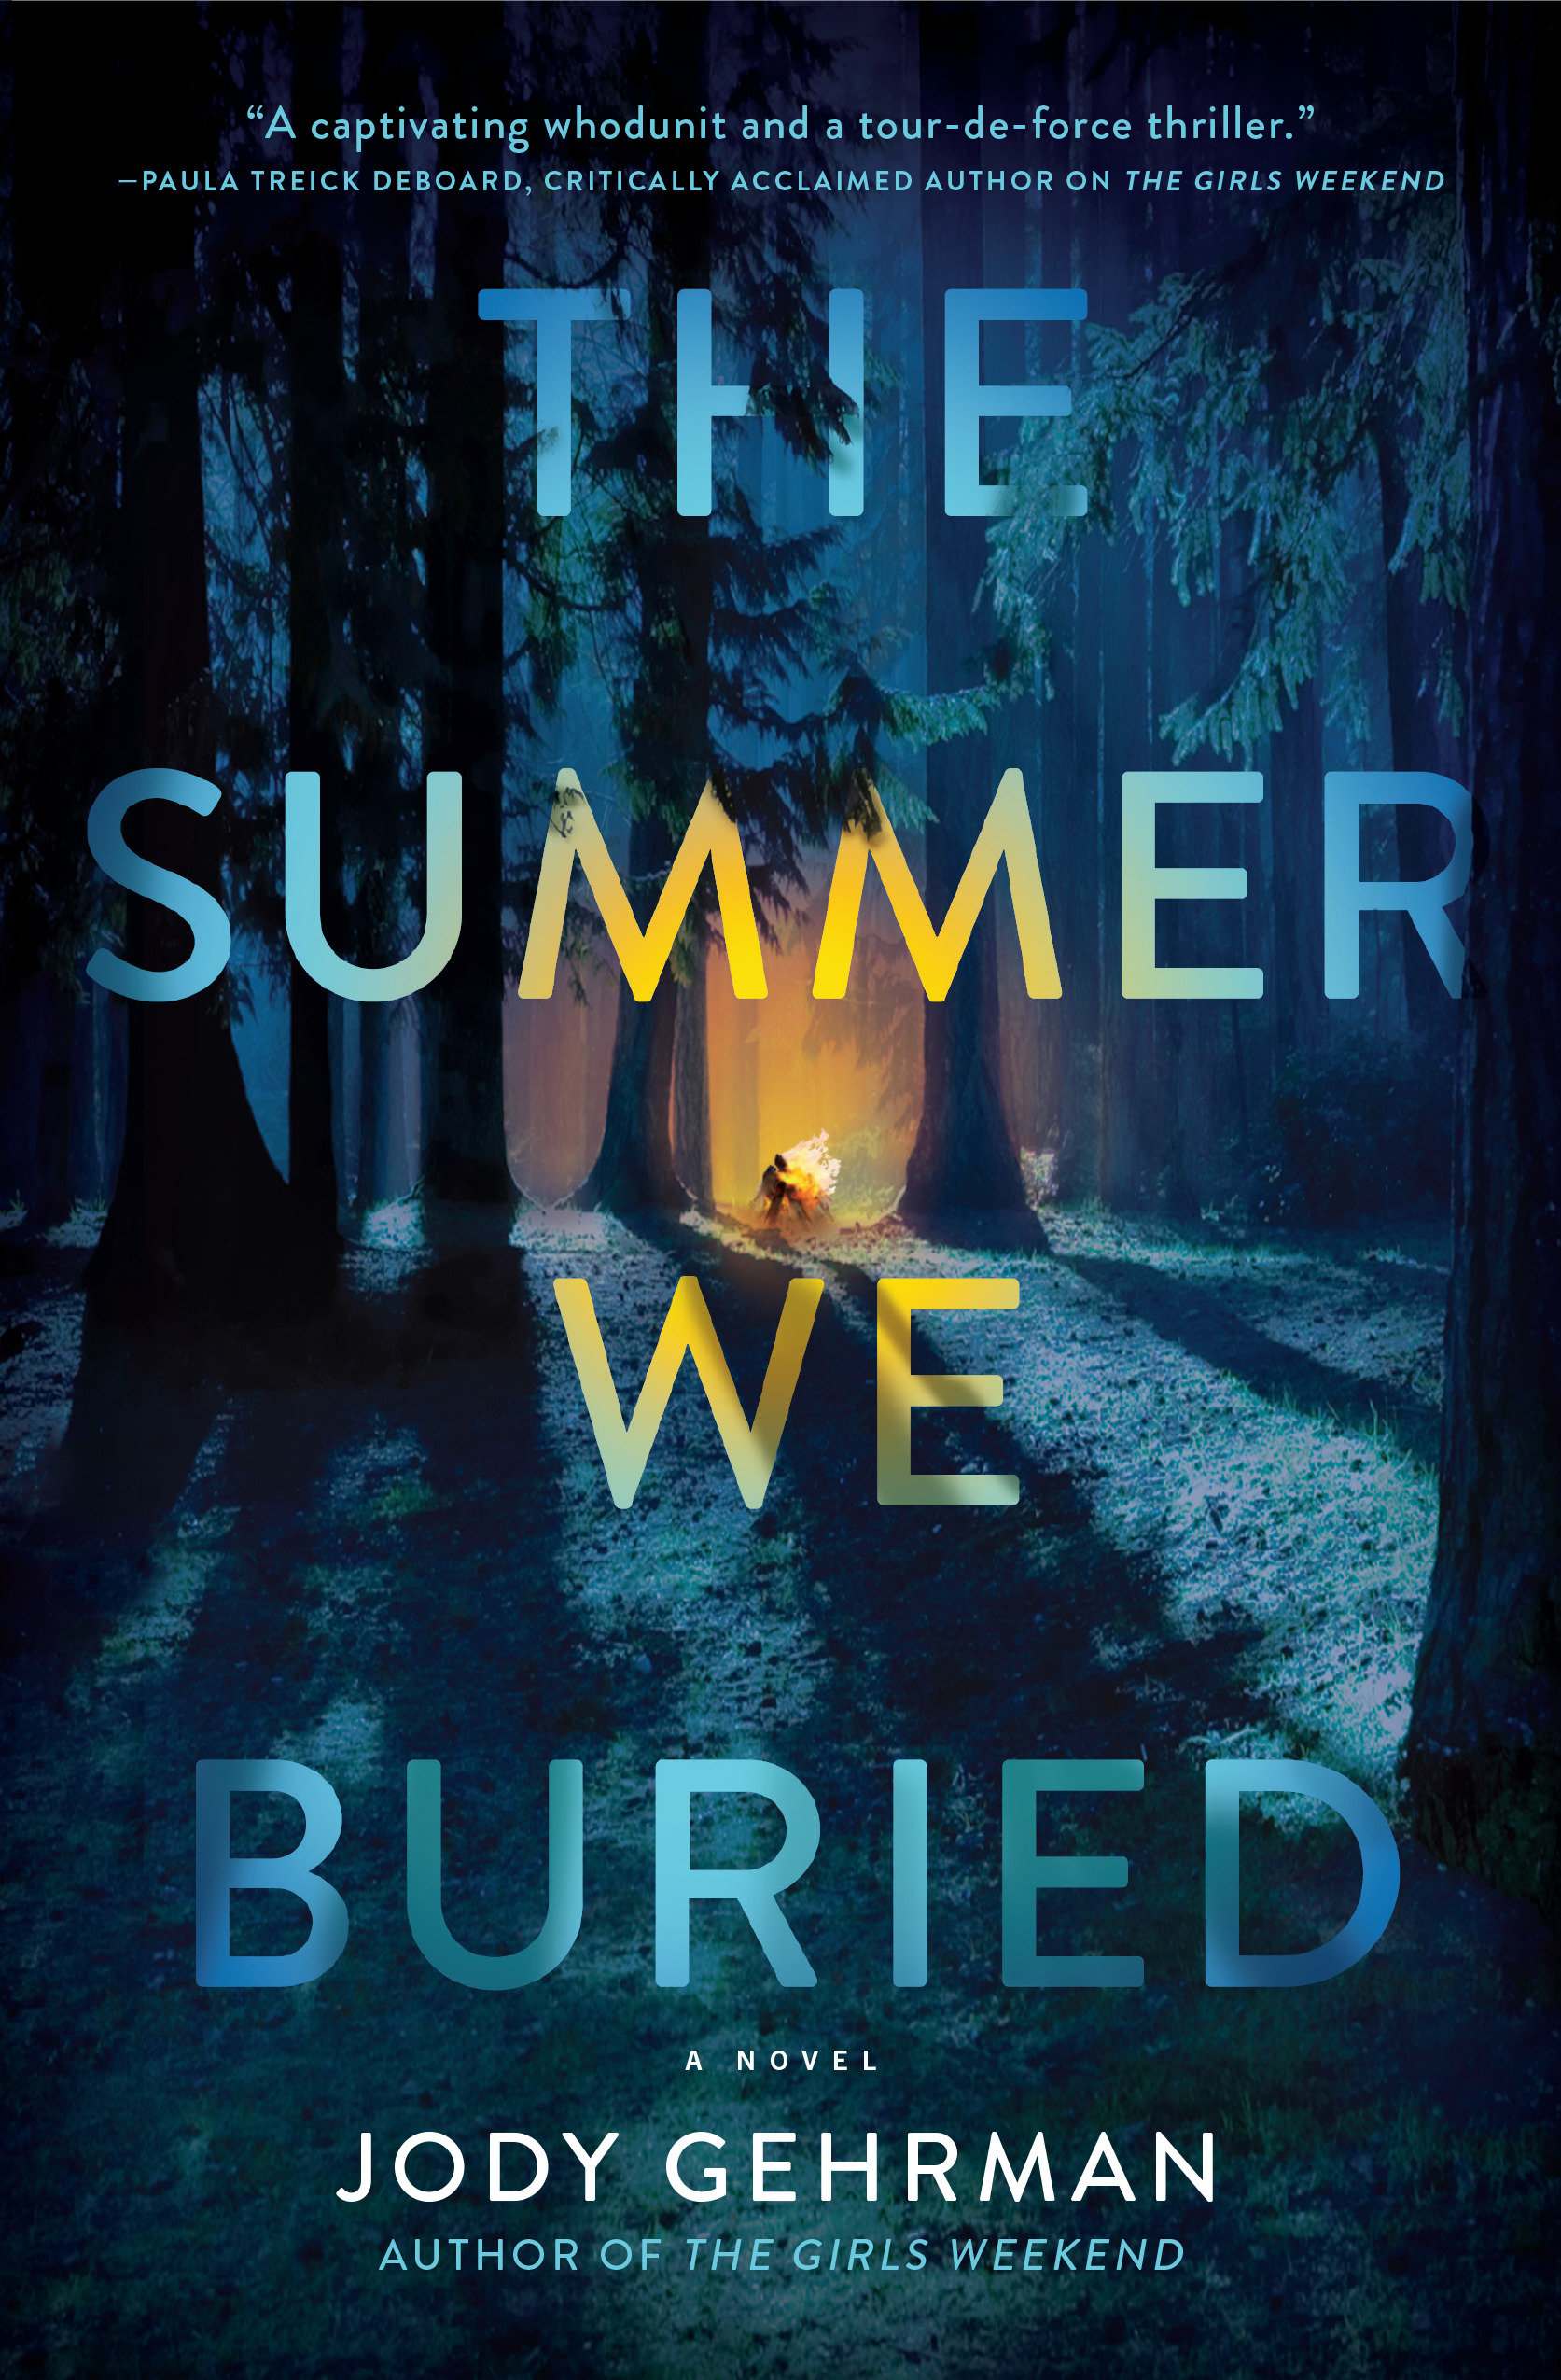 The Summer We Buried (Hardcover Book)